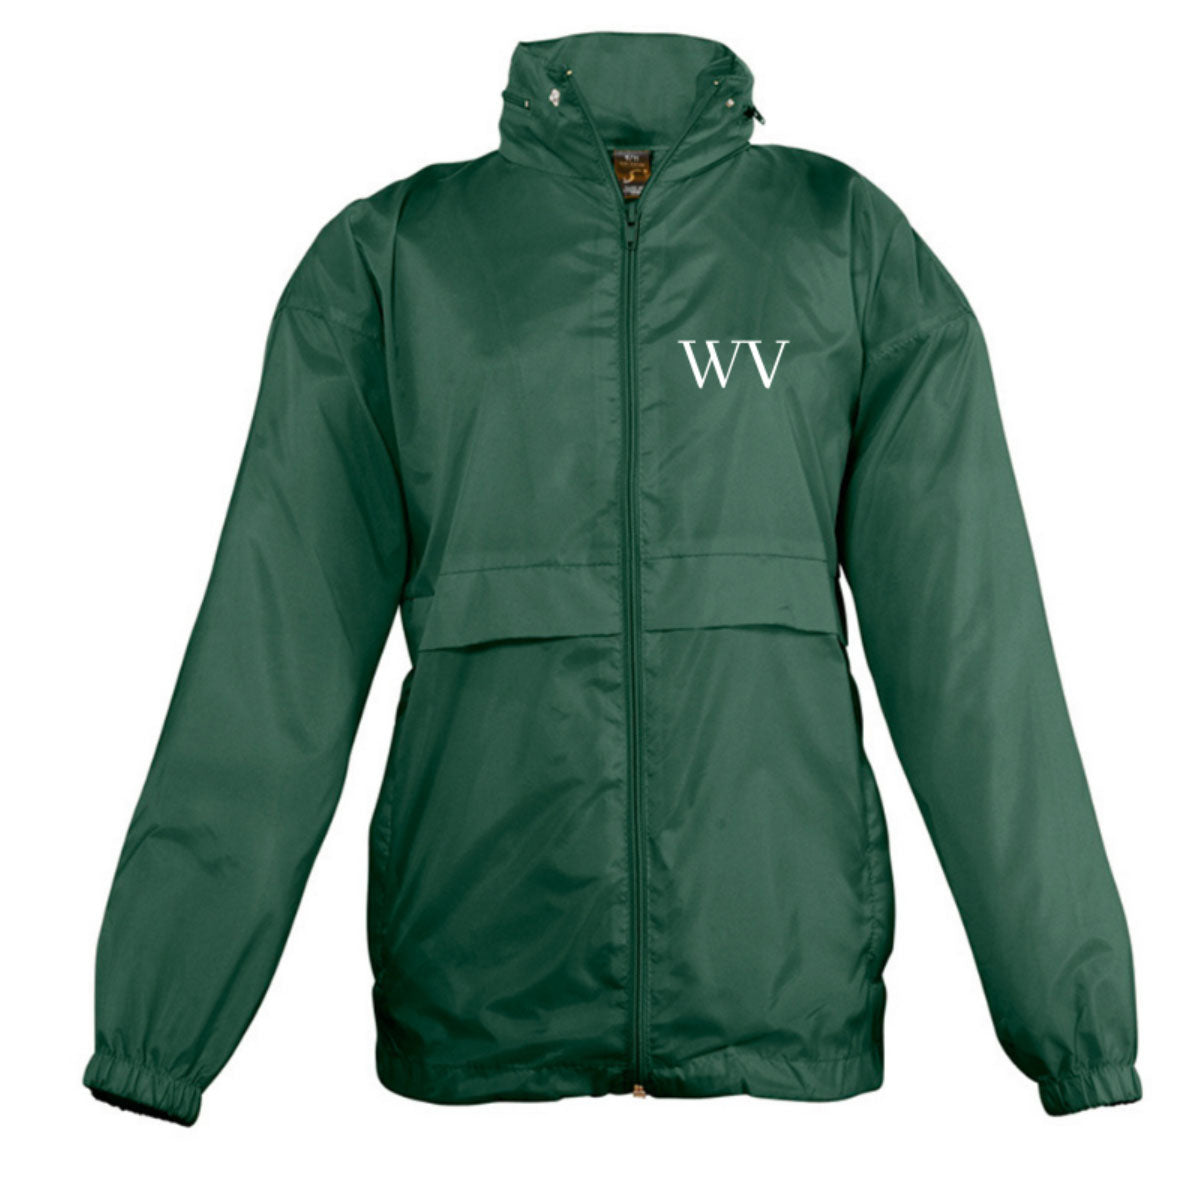 Embroidered Forest Green Windbreaker Jacket